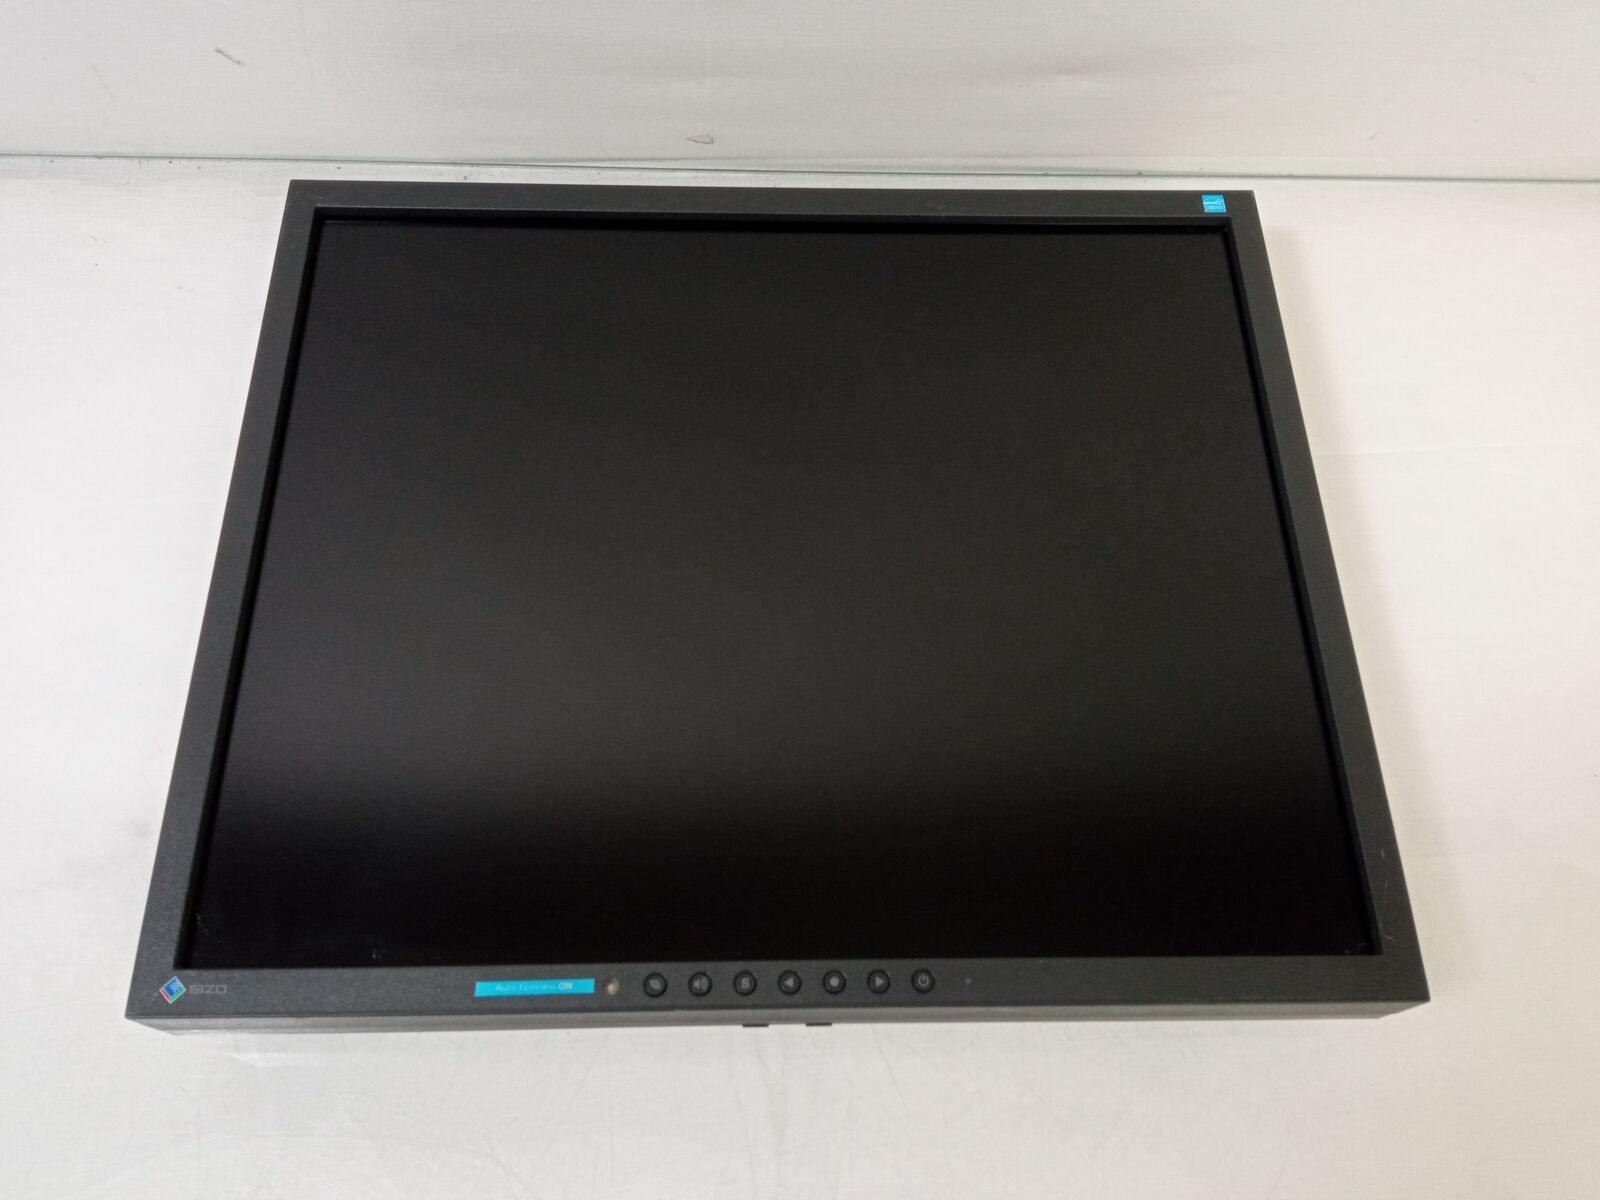 EIZO FlexScan S1921 19 Inch VGA DVI-D 1280 x 1024 Monitor Without Stand